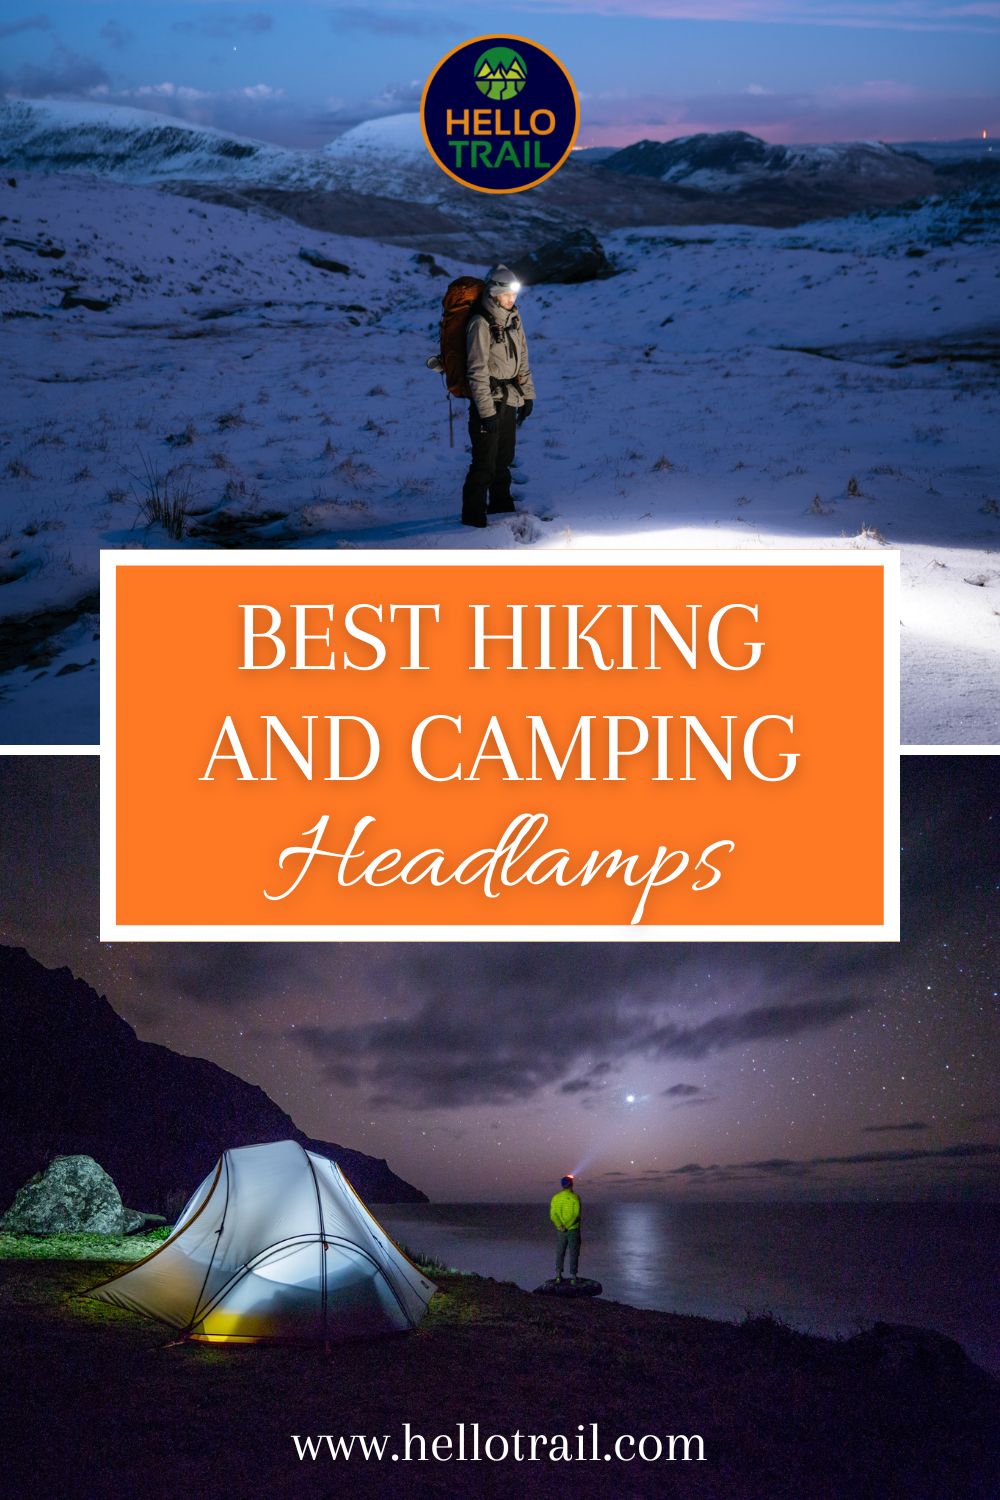 A headlamp really comes in handy when hiking and camping